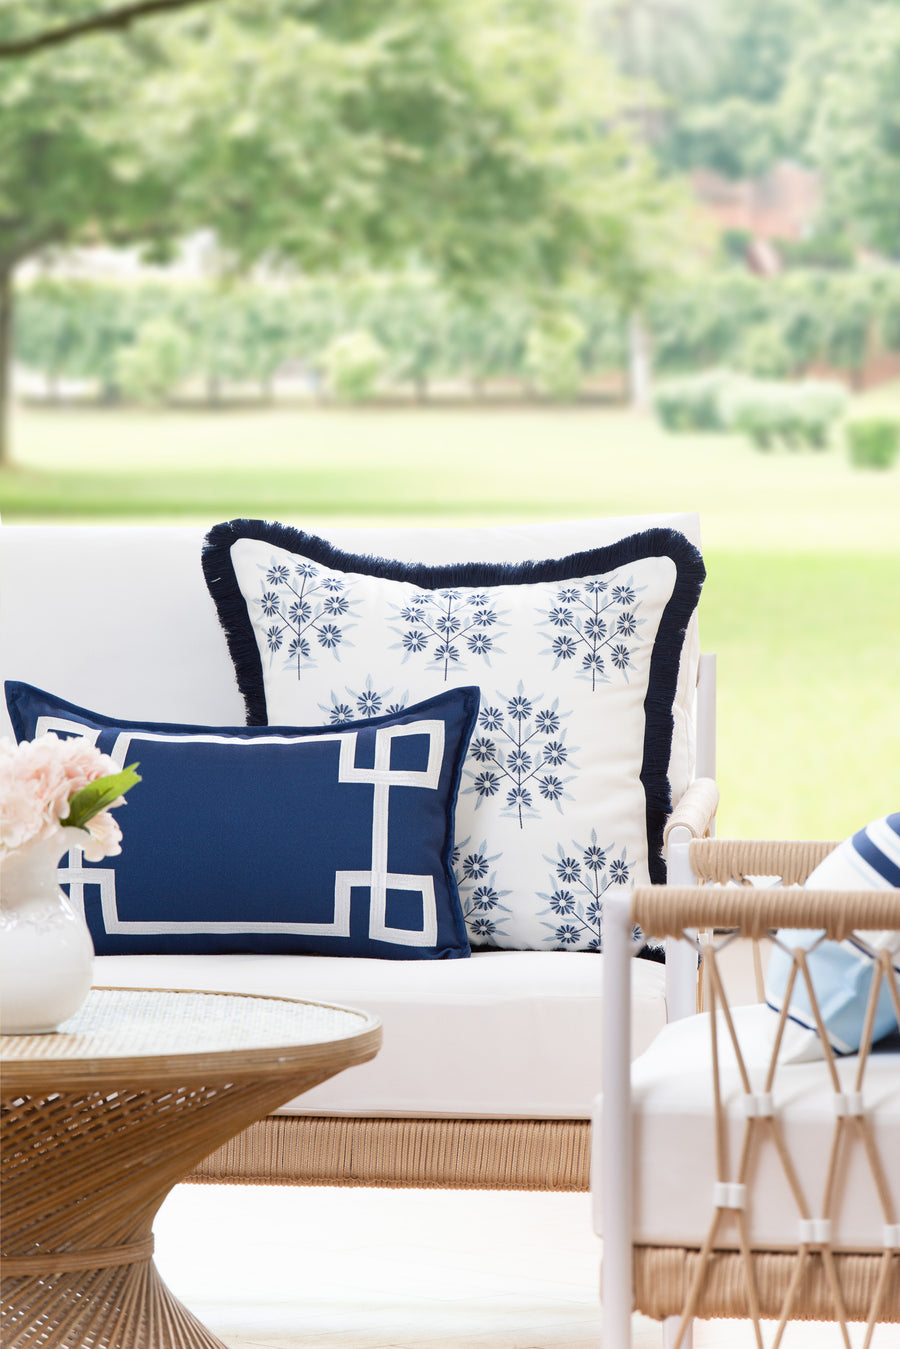 Coastal Indoor Outdoor Throw Pillow Cover, Embroidered Floral with Fringe, Navy Blue, 20